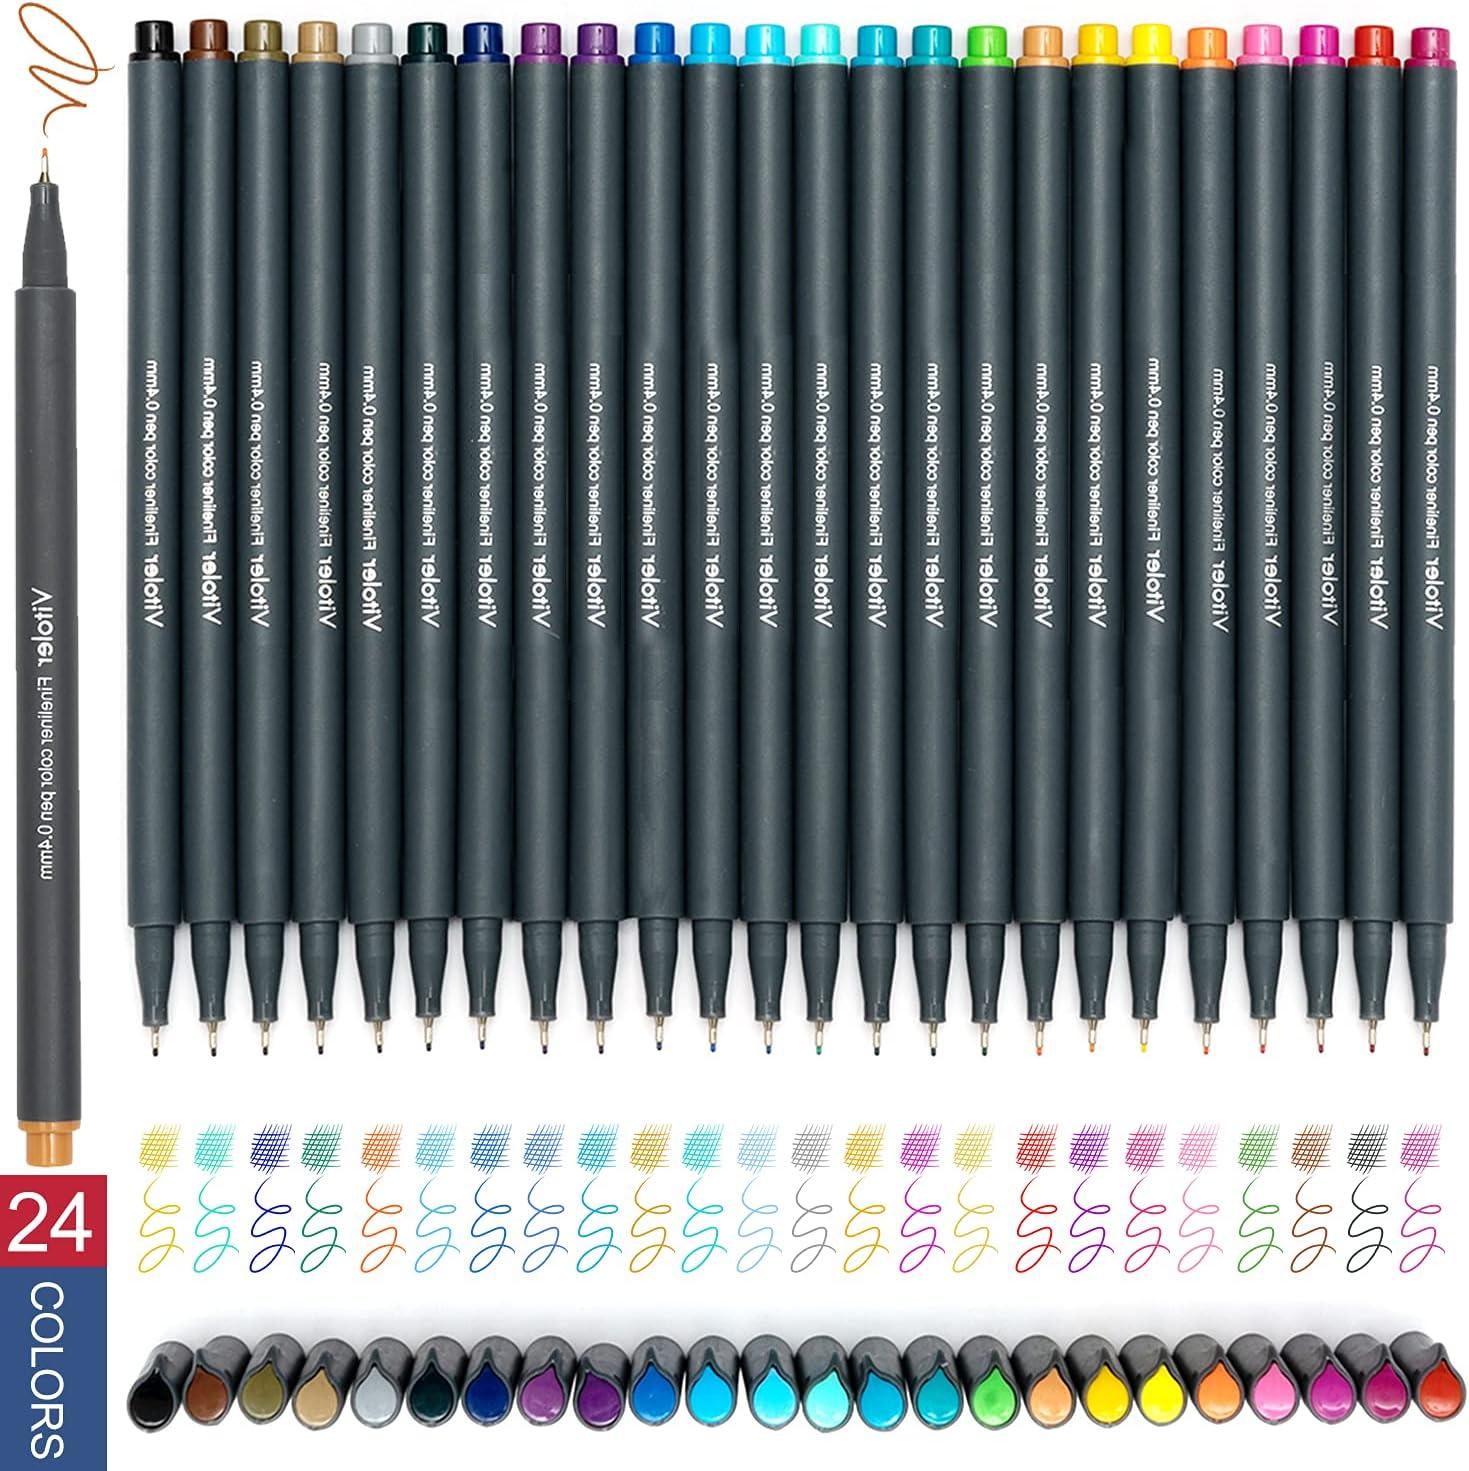  VITOLER Fineliner Colored Pens, Fine Point Marker Assorted  Color Drawing Planner Pens, Pack of 18 Assorted Color for Bullet Journaling  Writing Note Taking Calendar Coloring Art : Arts, Crafts & Sewing